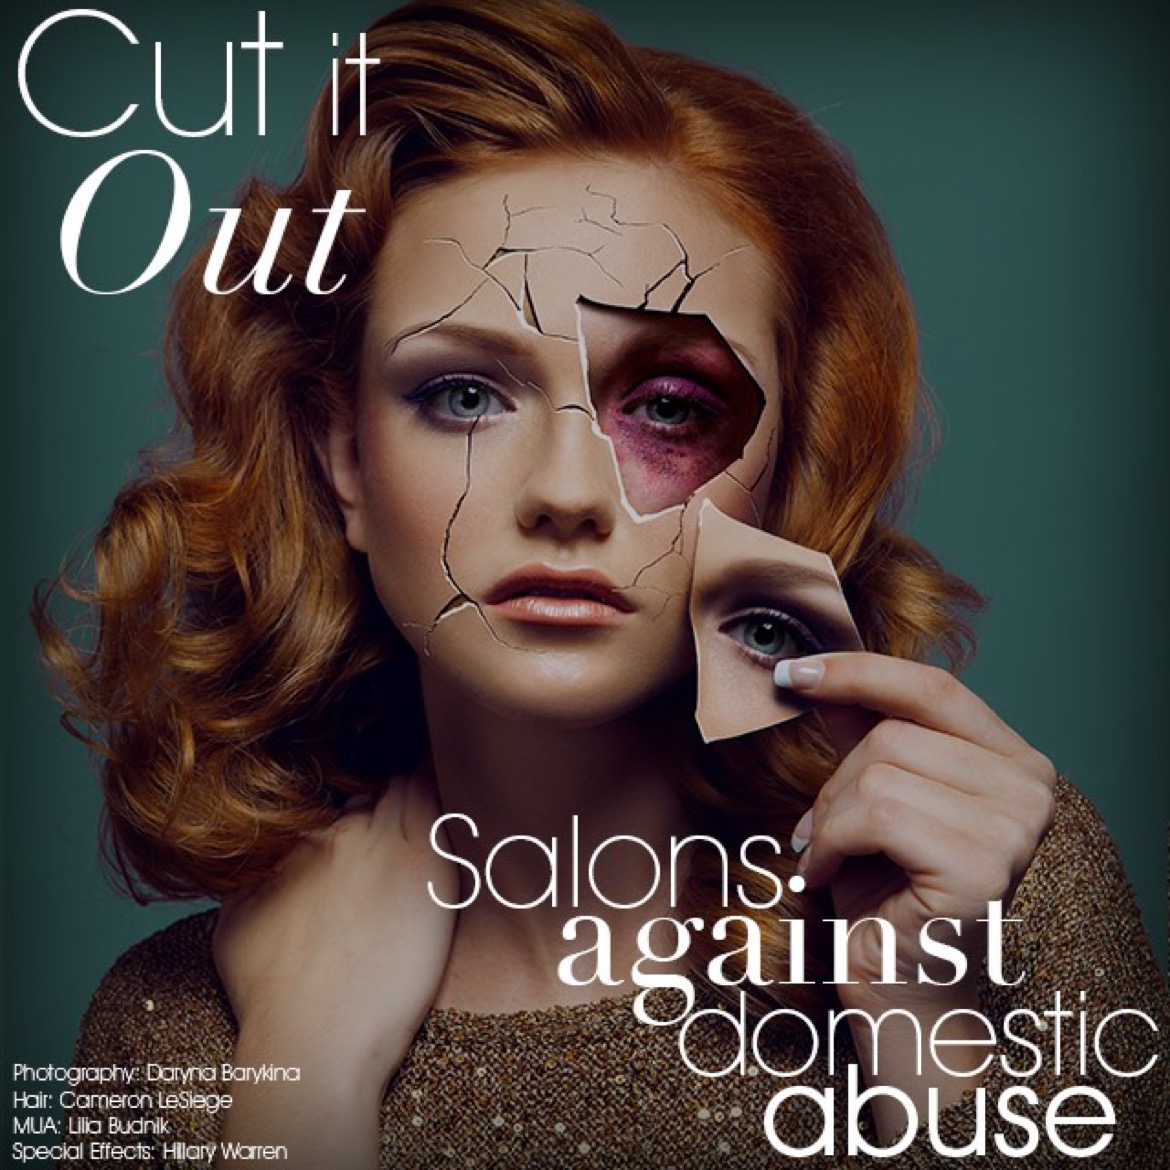 NEWS | A new awareness initiative has been launched across Herefordshire to help professional’s spot signs of domestic abuse with their clients